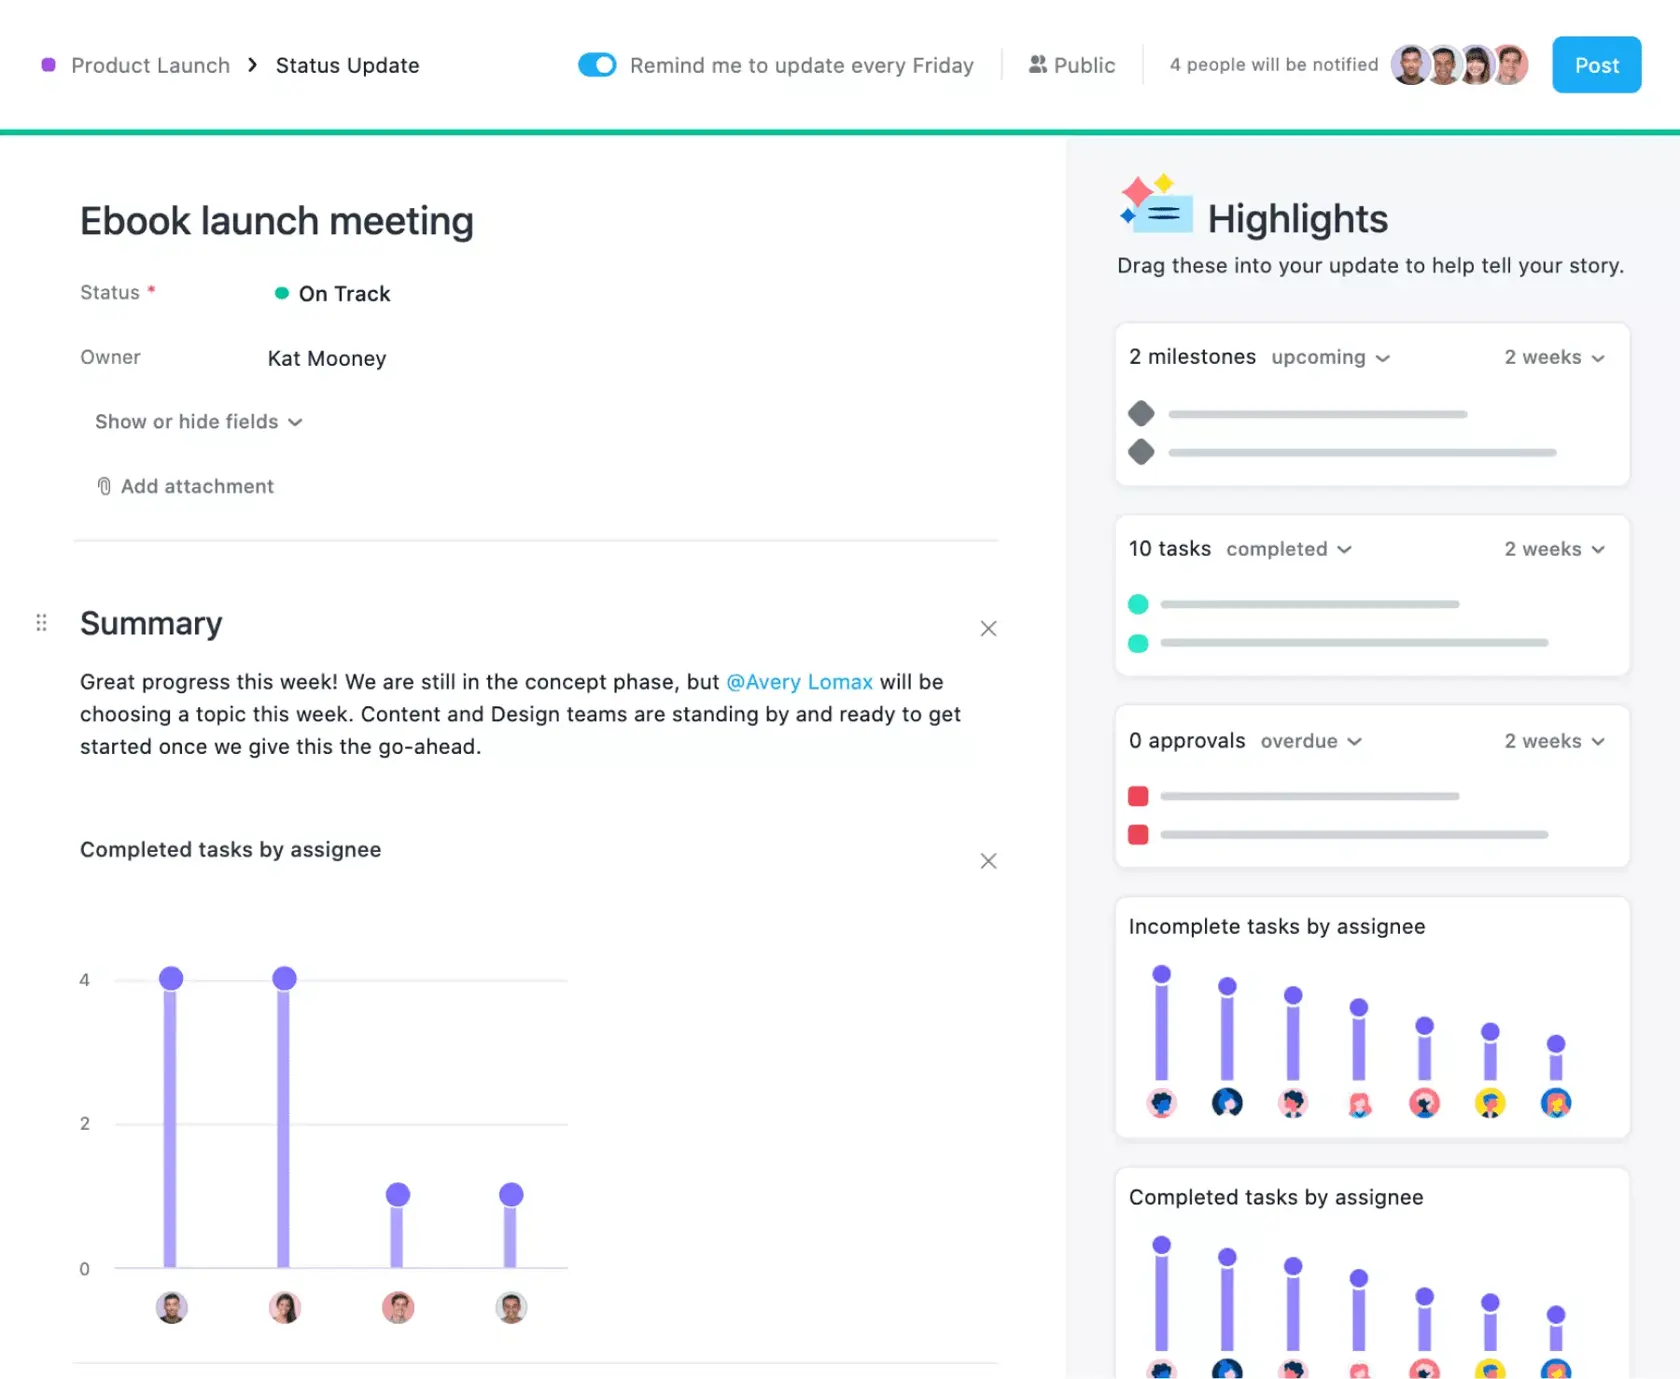 [Product UI] Example Asana project status report for an ebook launch meeting (Status Updates)